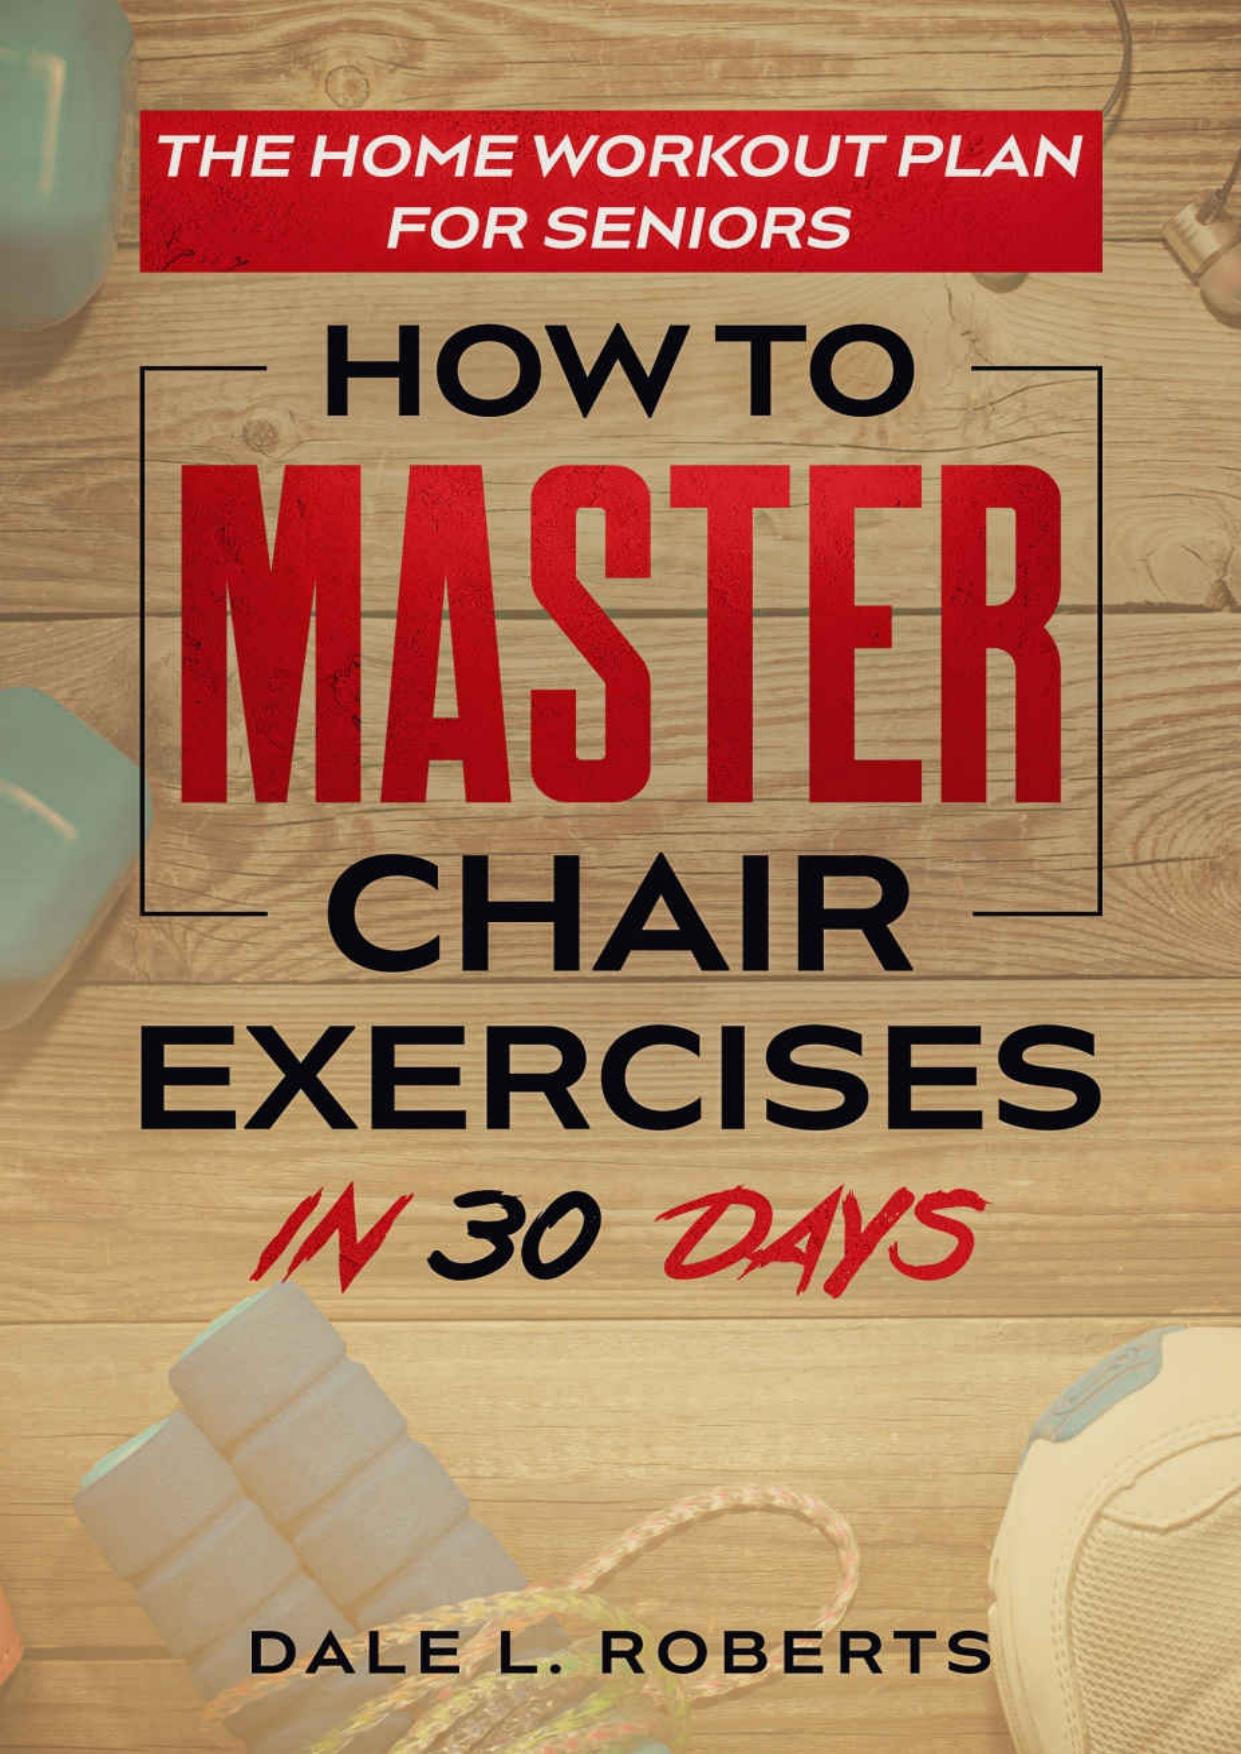 The Home Workout Plan for Seniors: How to Master Chair Exercises in 30 Days (Fitness Short Reads Book 6) by Dale L. Roberts